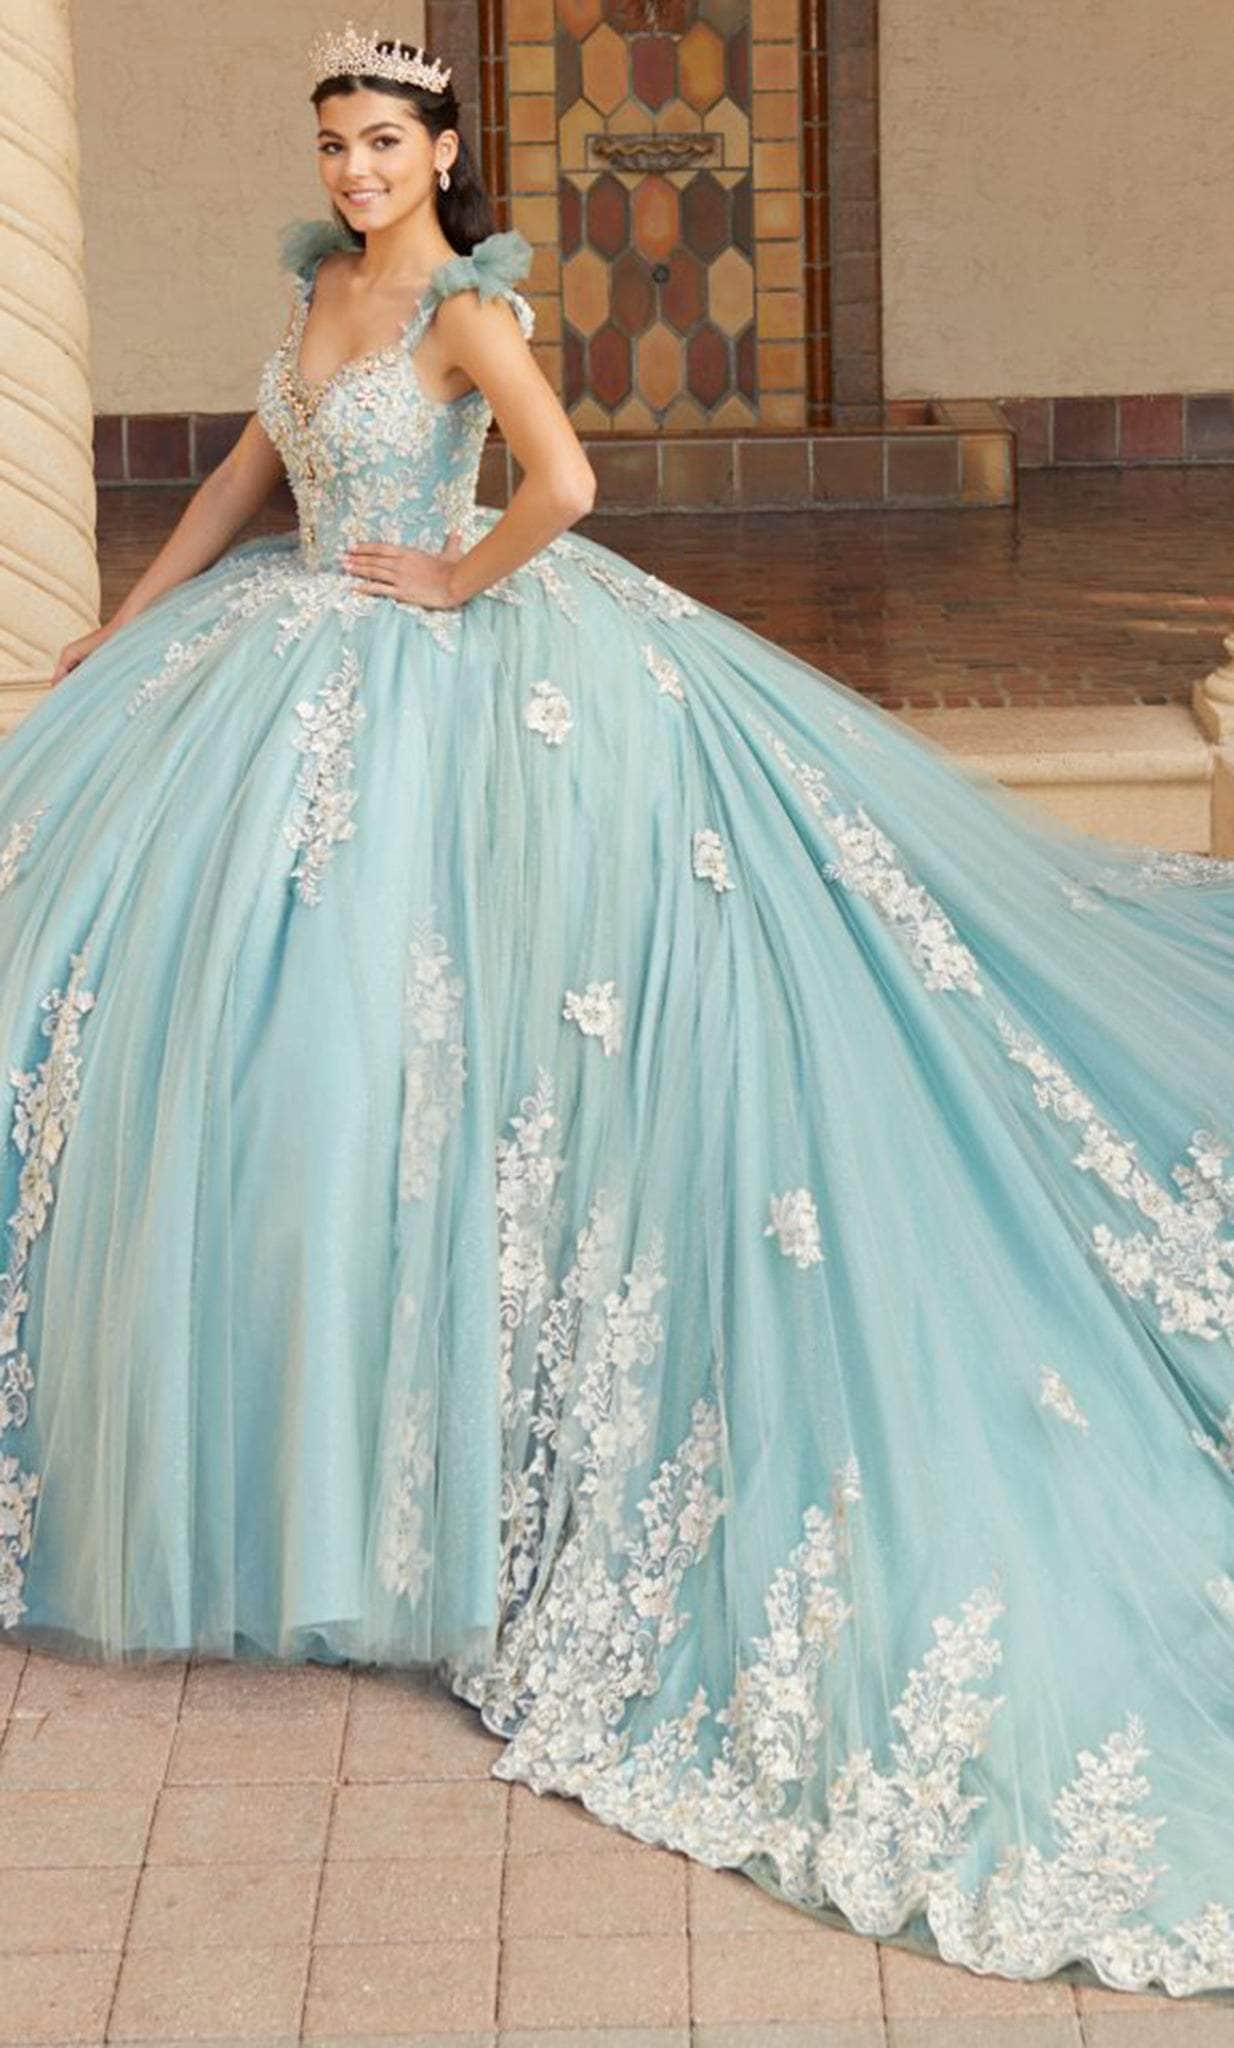 Quinceanera Collection 26059 - V-Neck Embroidered Ballgown Quinceanera Dresses 0 / Seafoam/Champagne